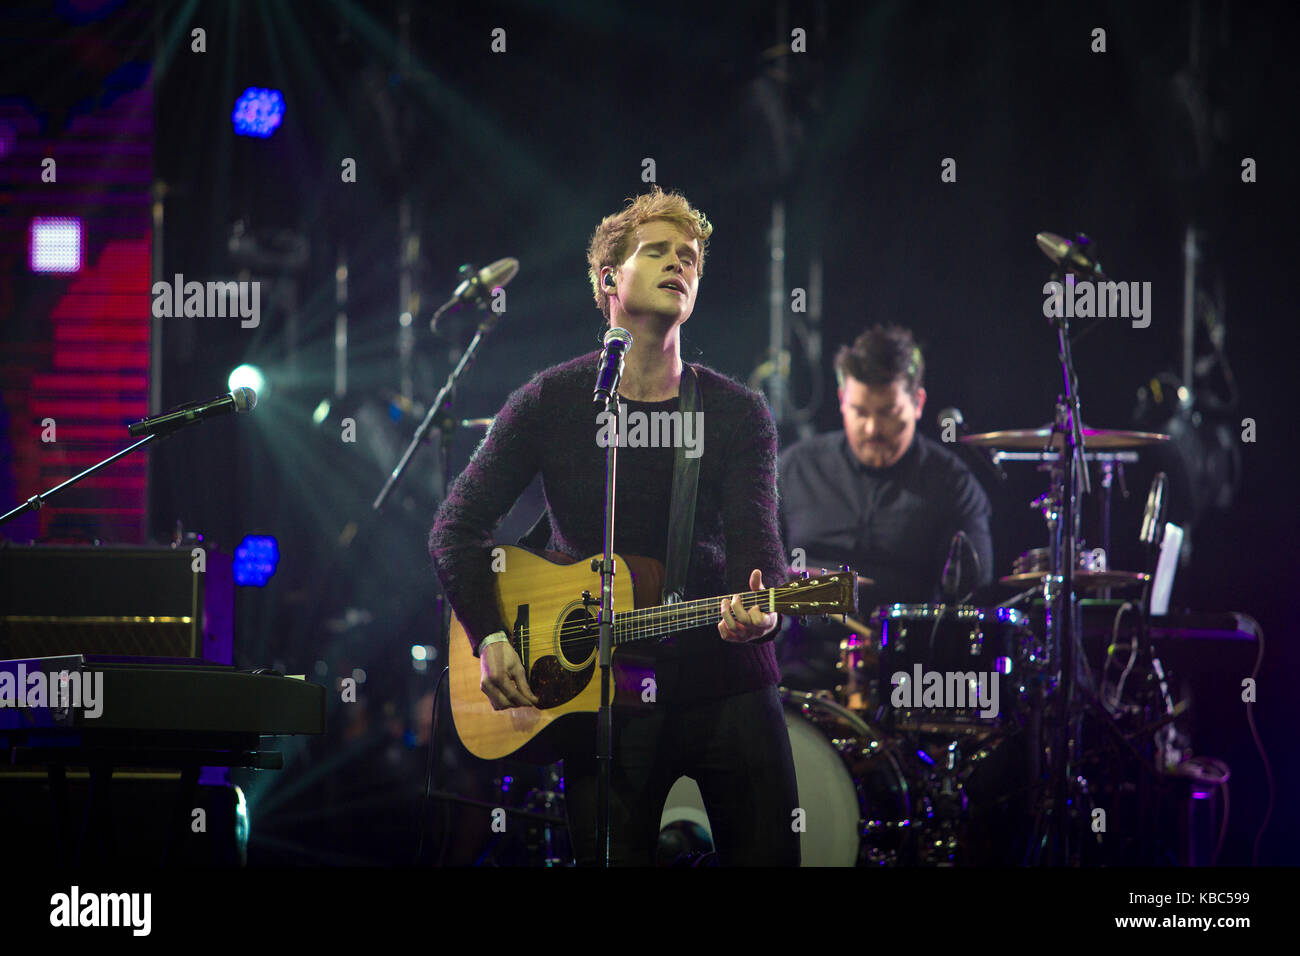 The Irish indie pop band Kodaline performs a live concert at the European  Border Breakers Awards